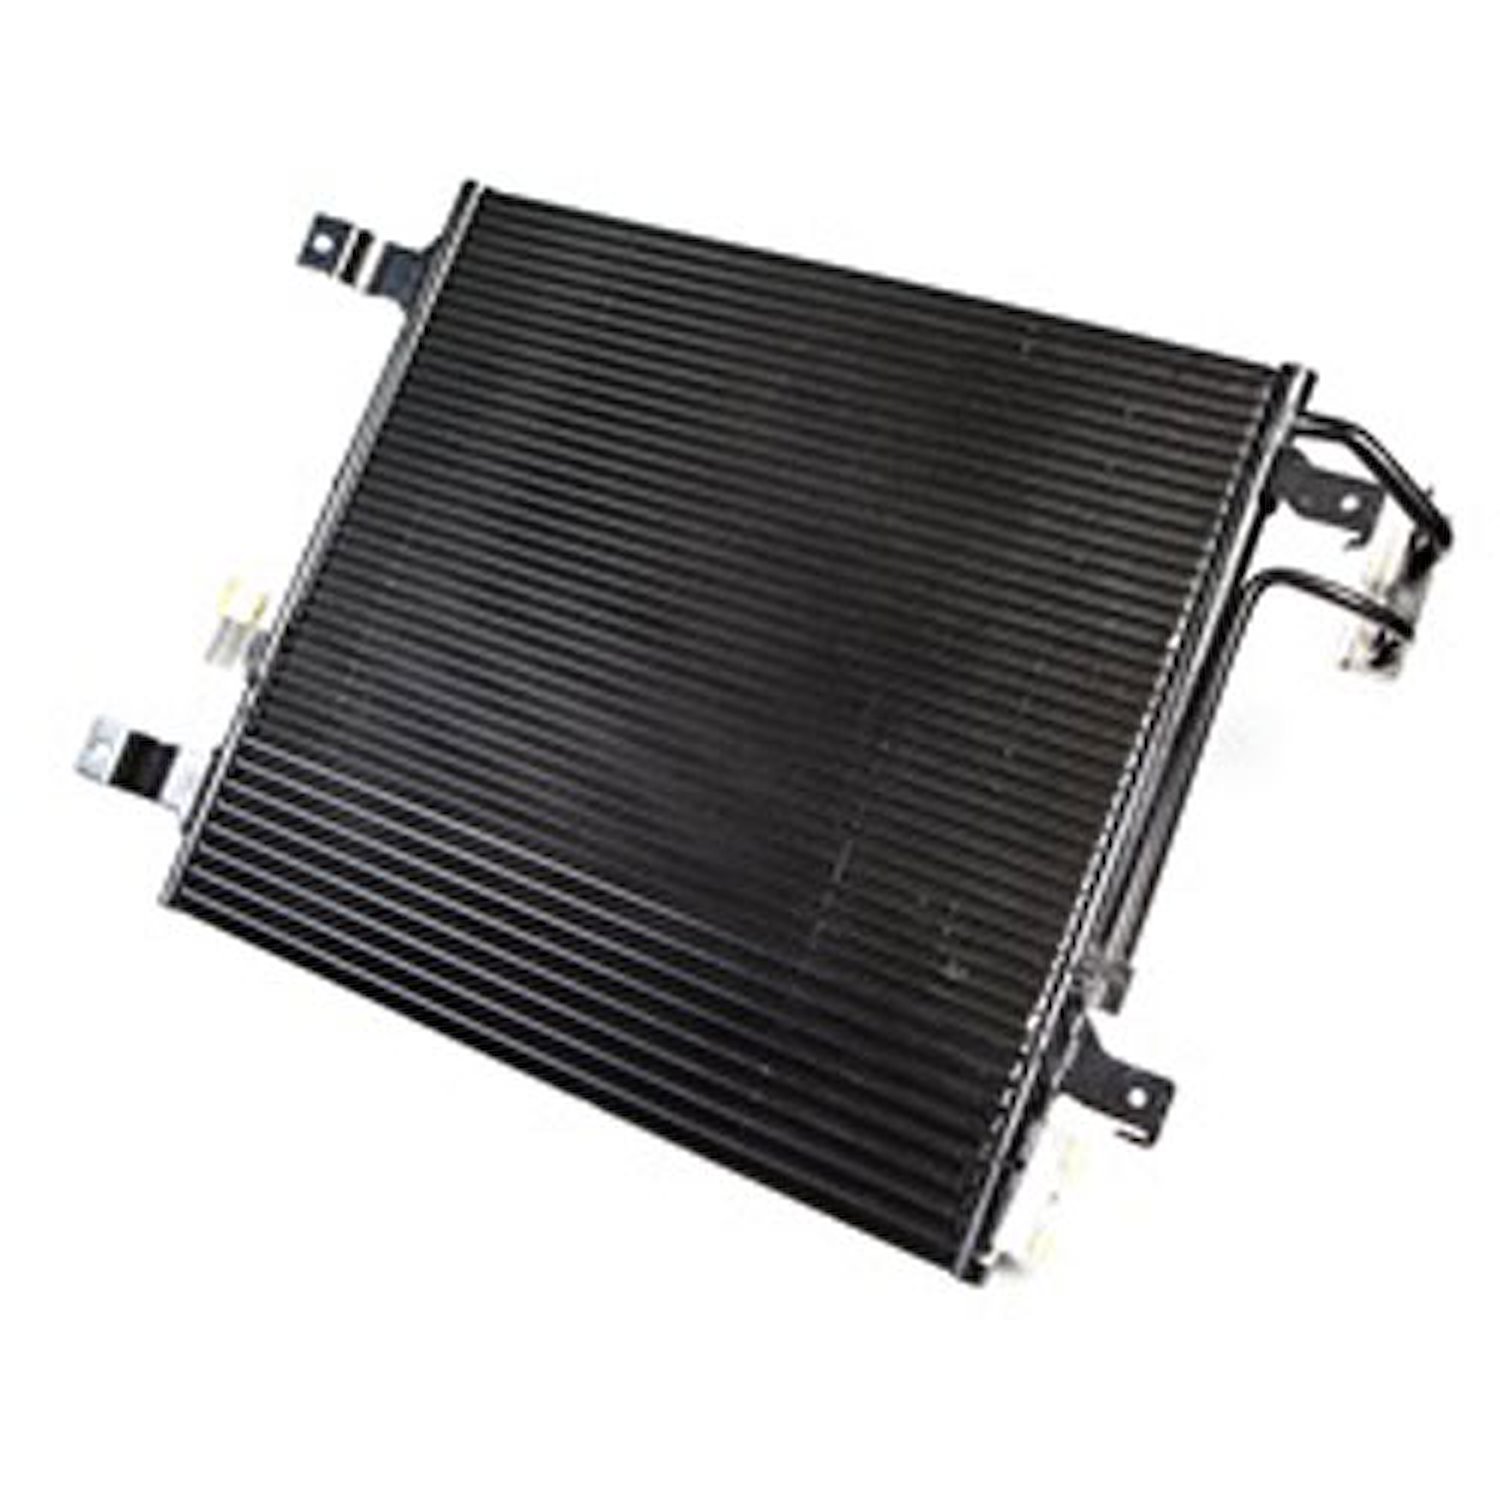 Replacement air conditioning condenser from Omix-ADA, Fits 07-12 Jeep Wranglers with a transmission oil cooler